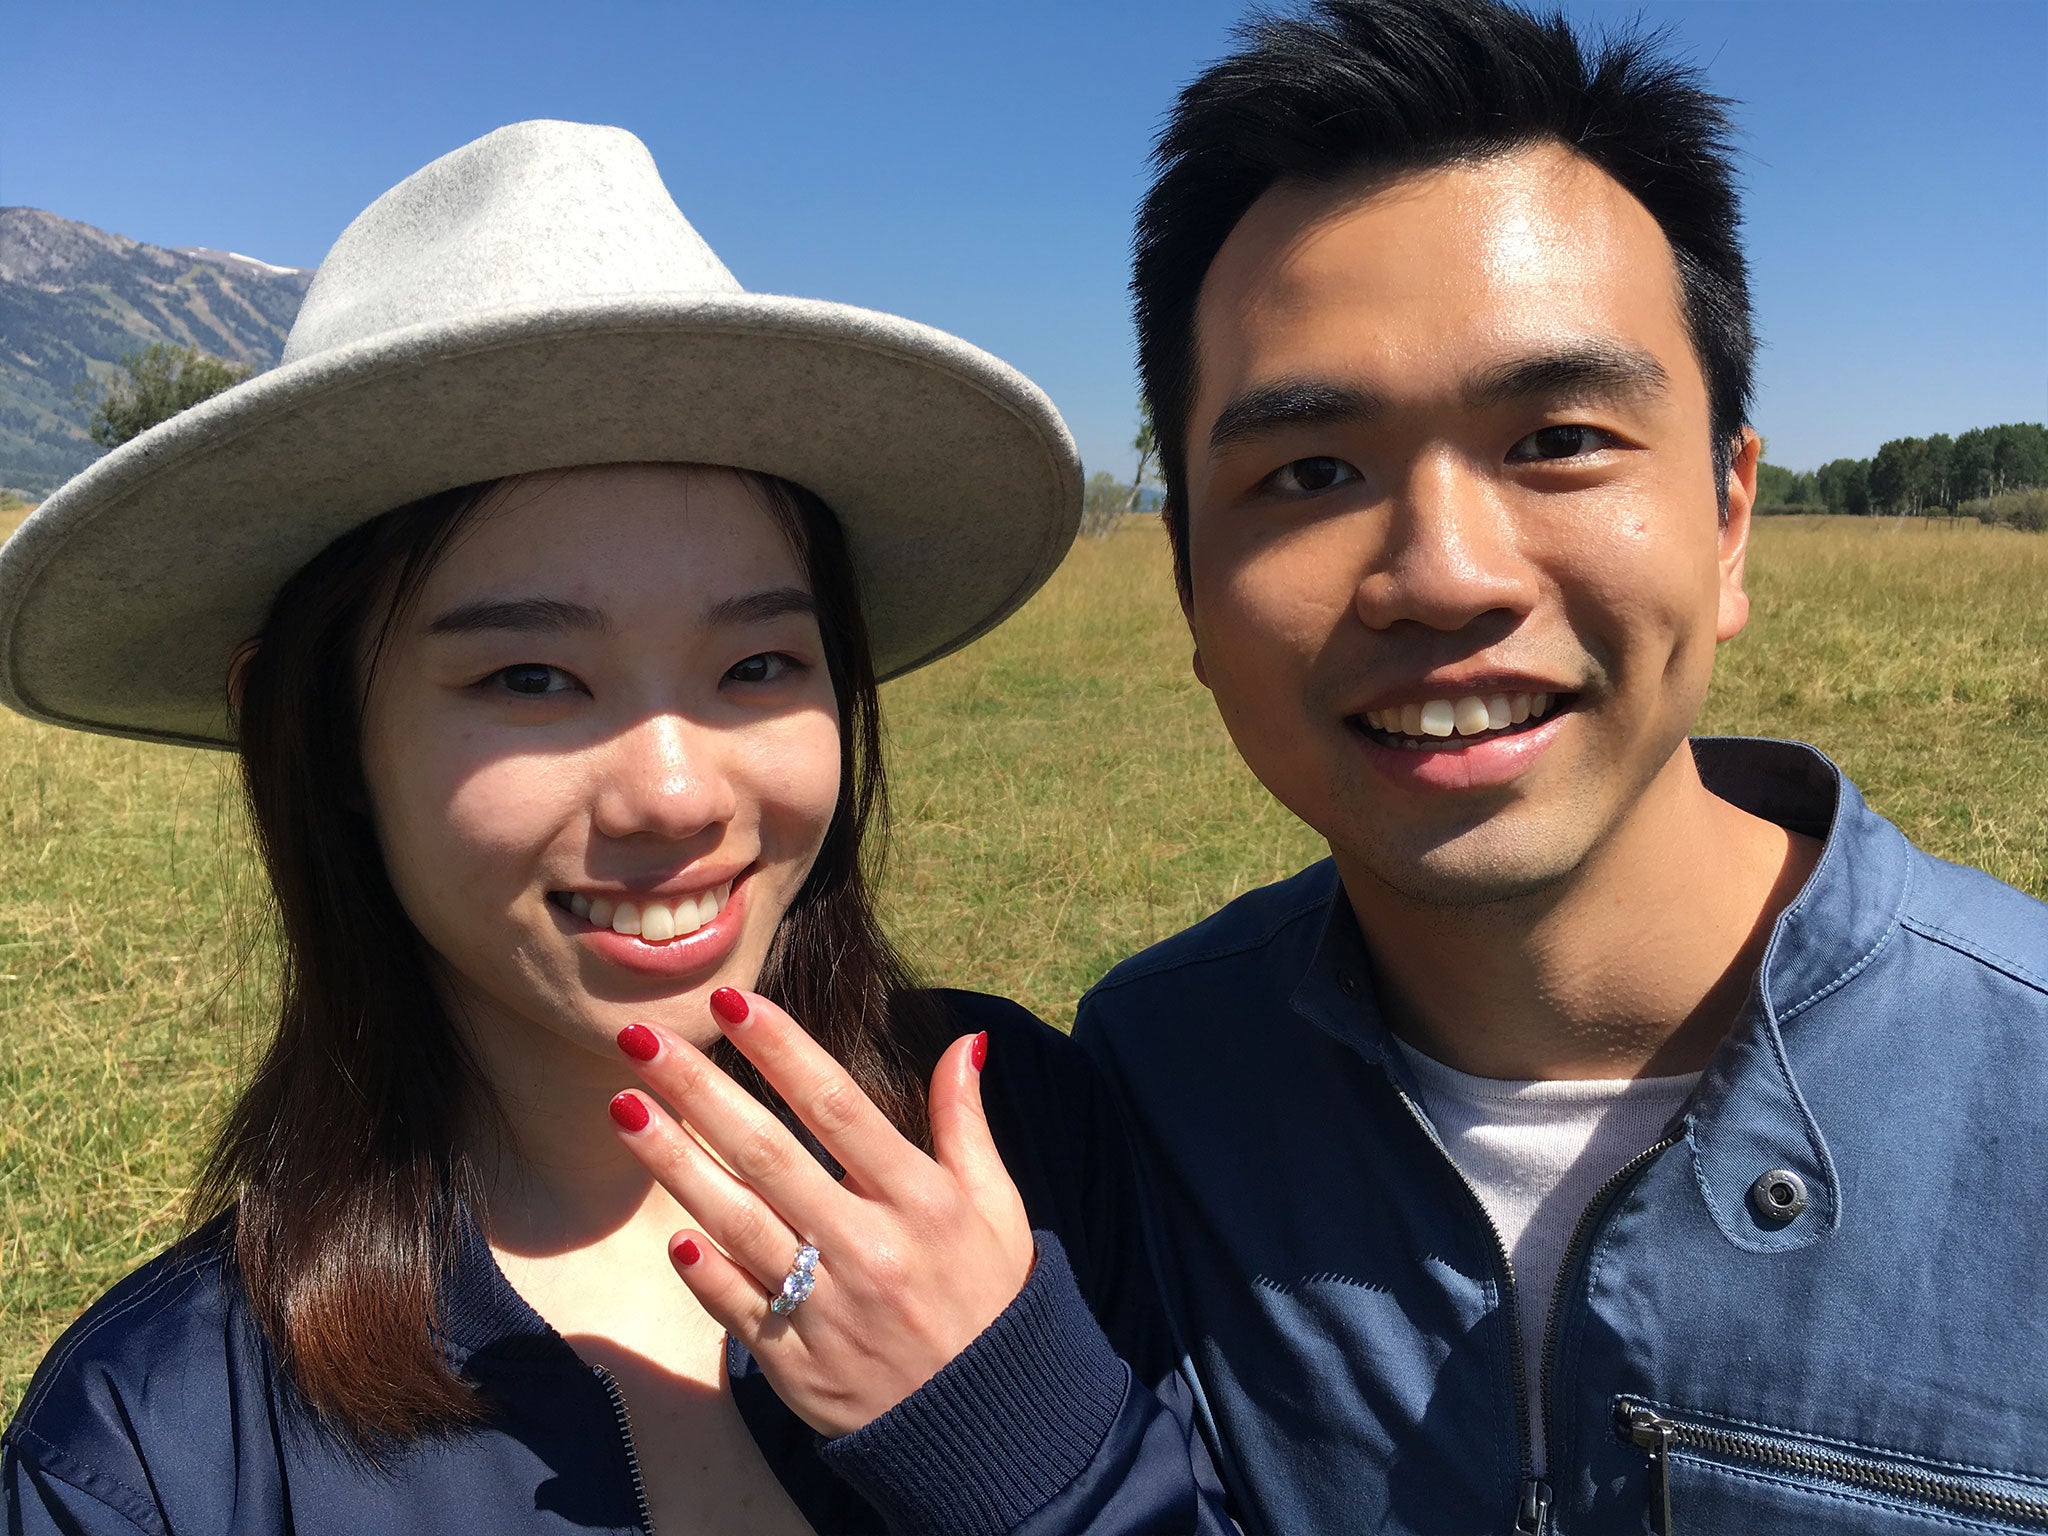 Joshua Bay proposed to his girlfriend Alexandra Cheng after the eclipse